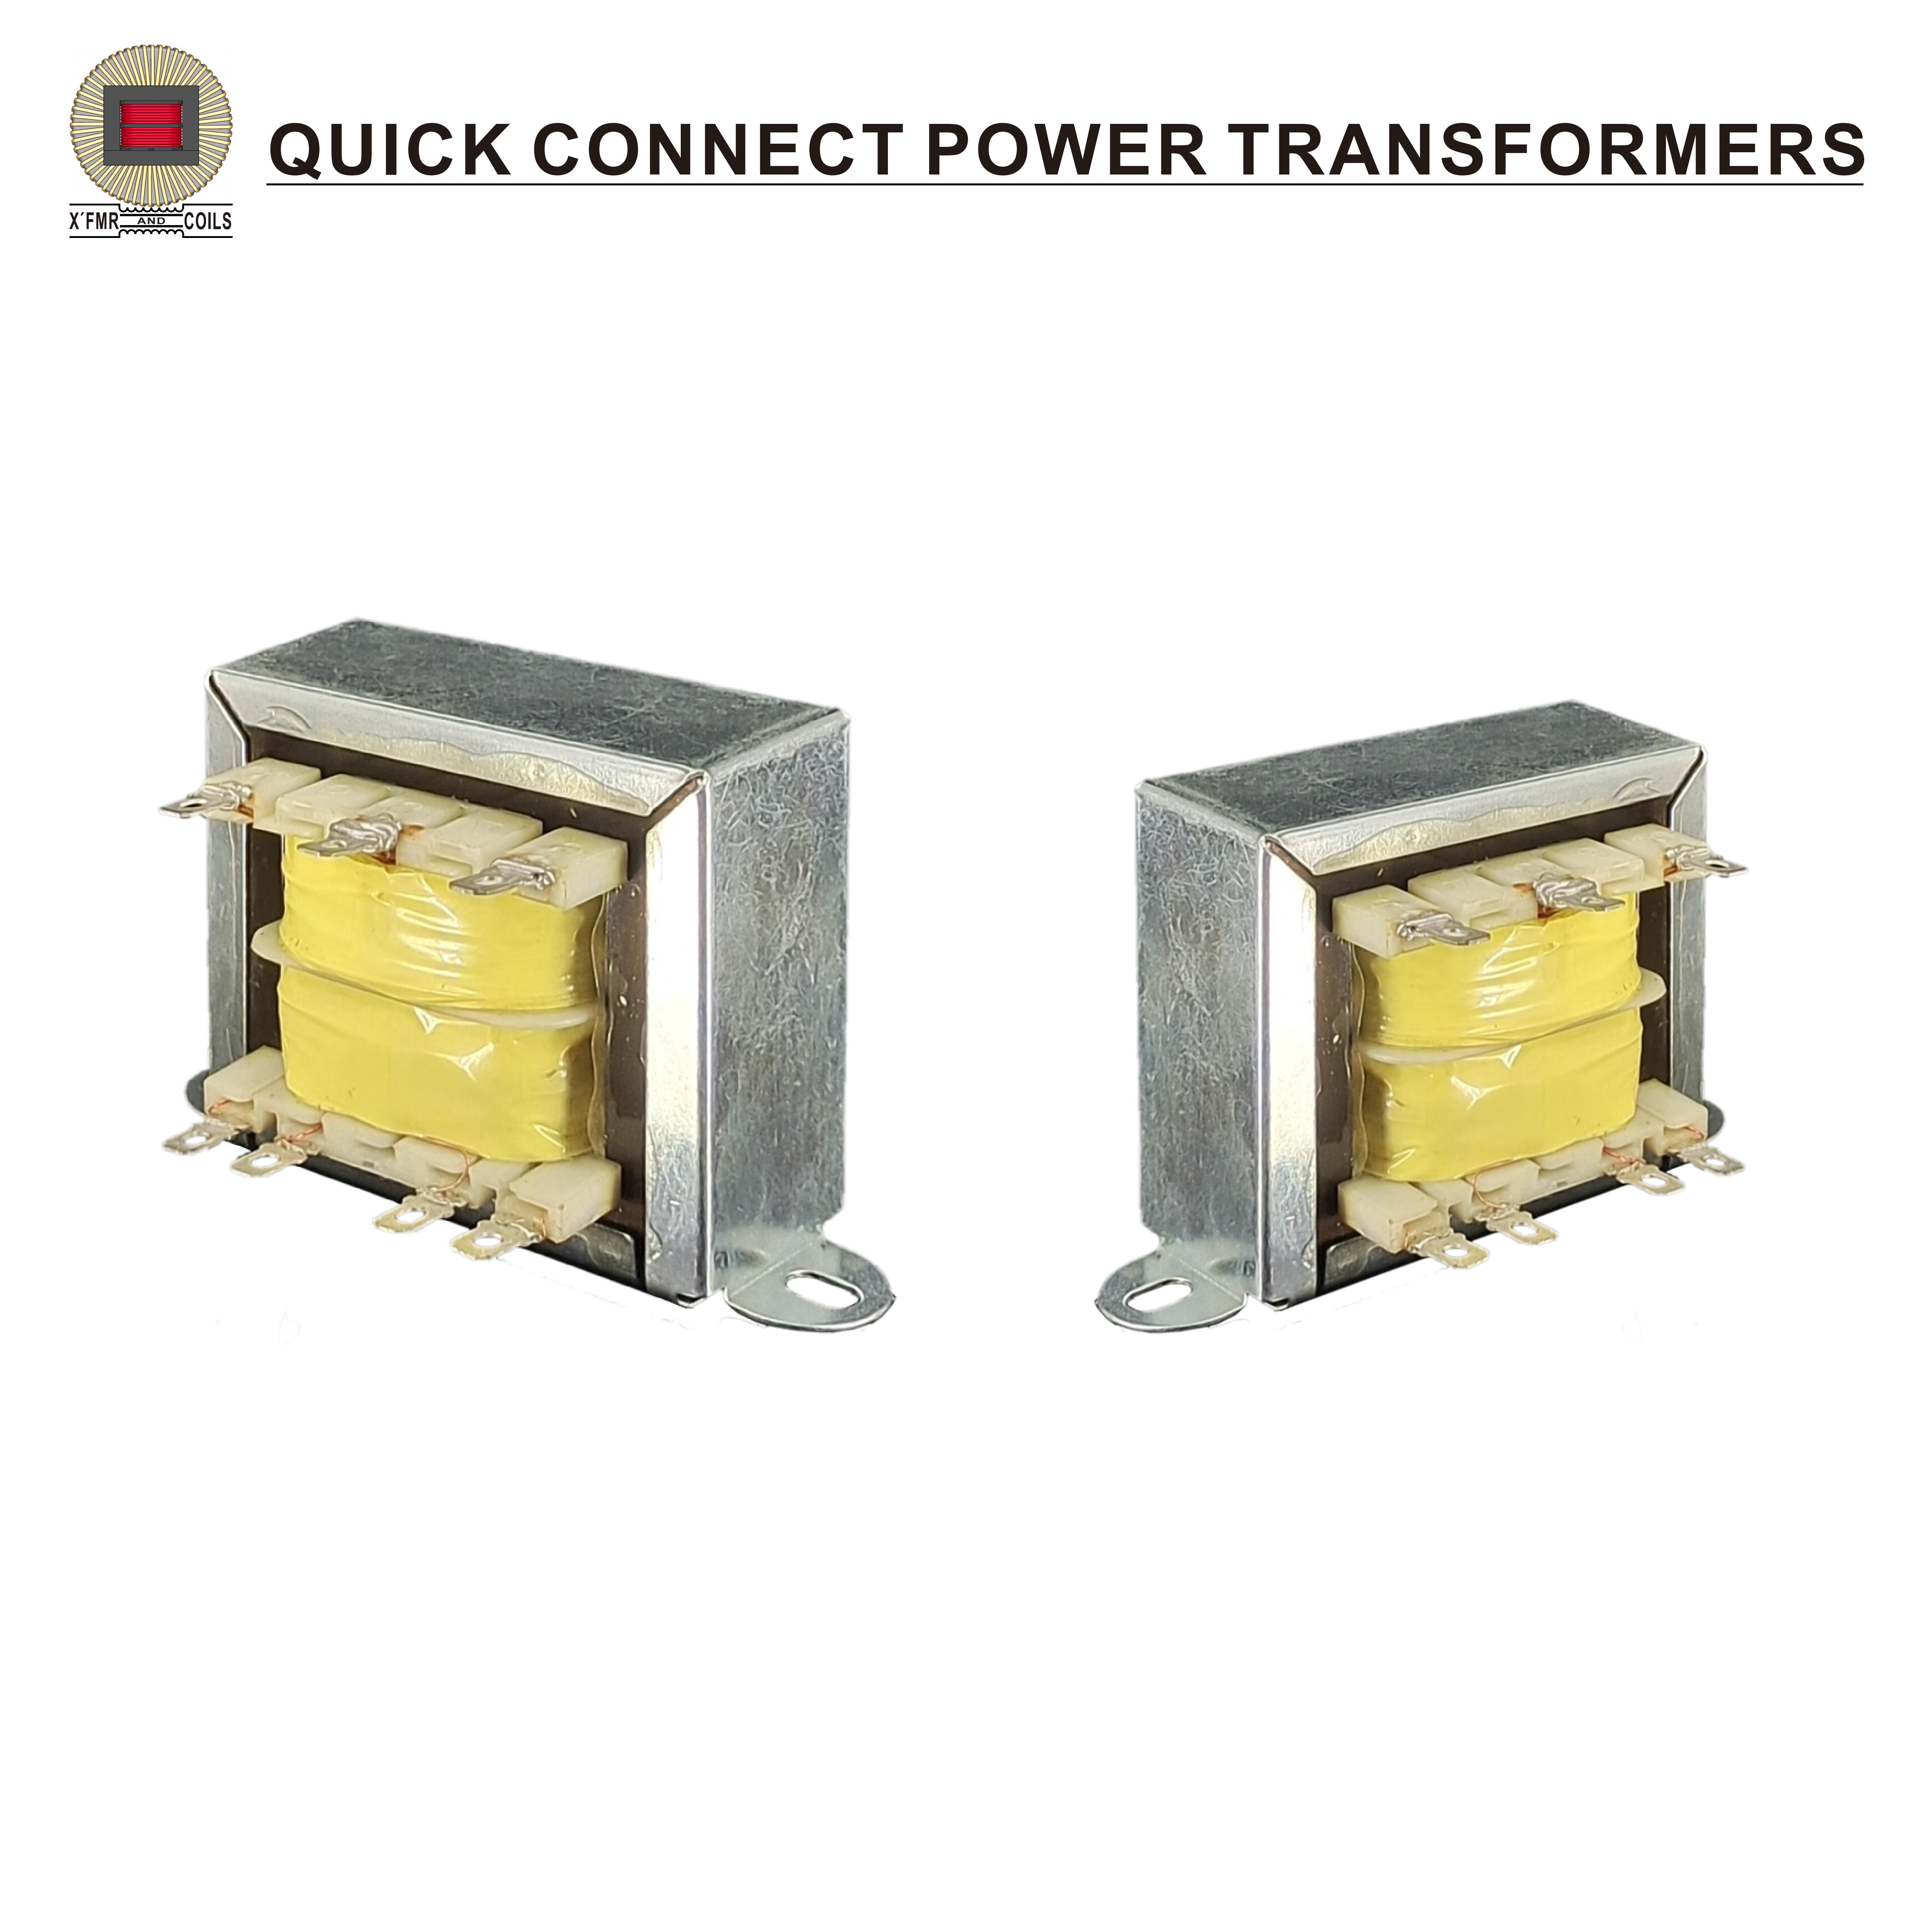 Quick Connect Power Transformers QCPT-01 Series